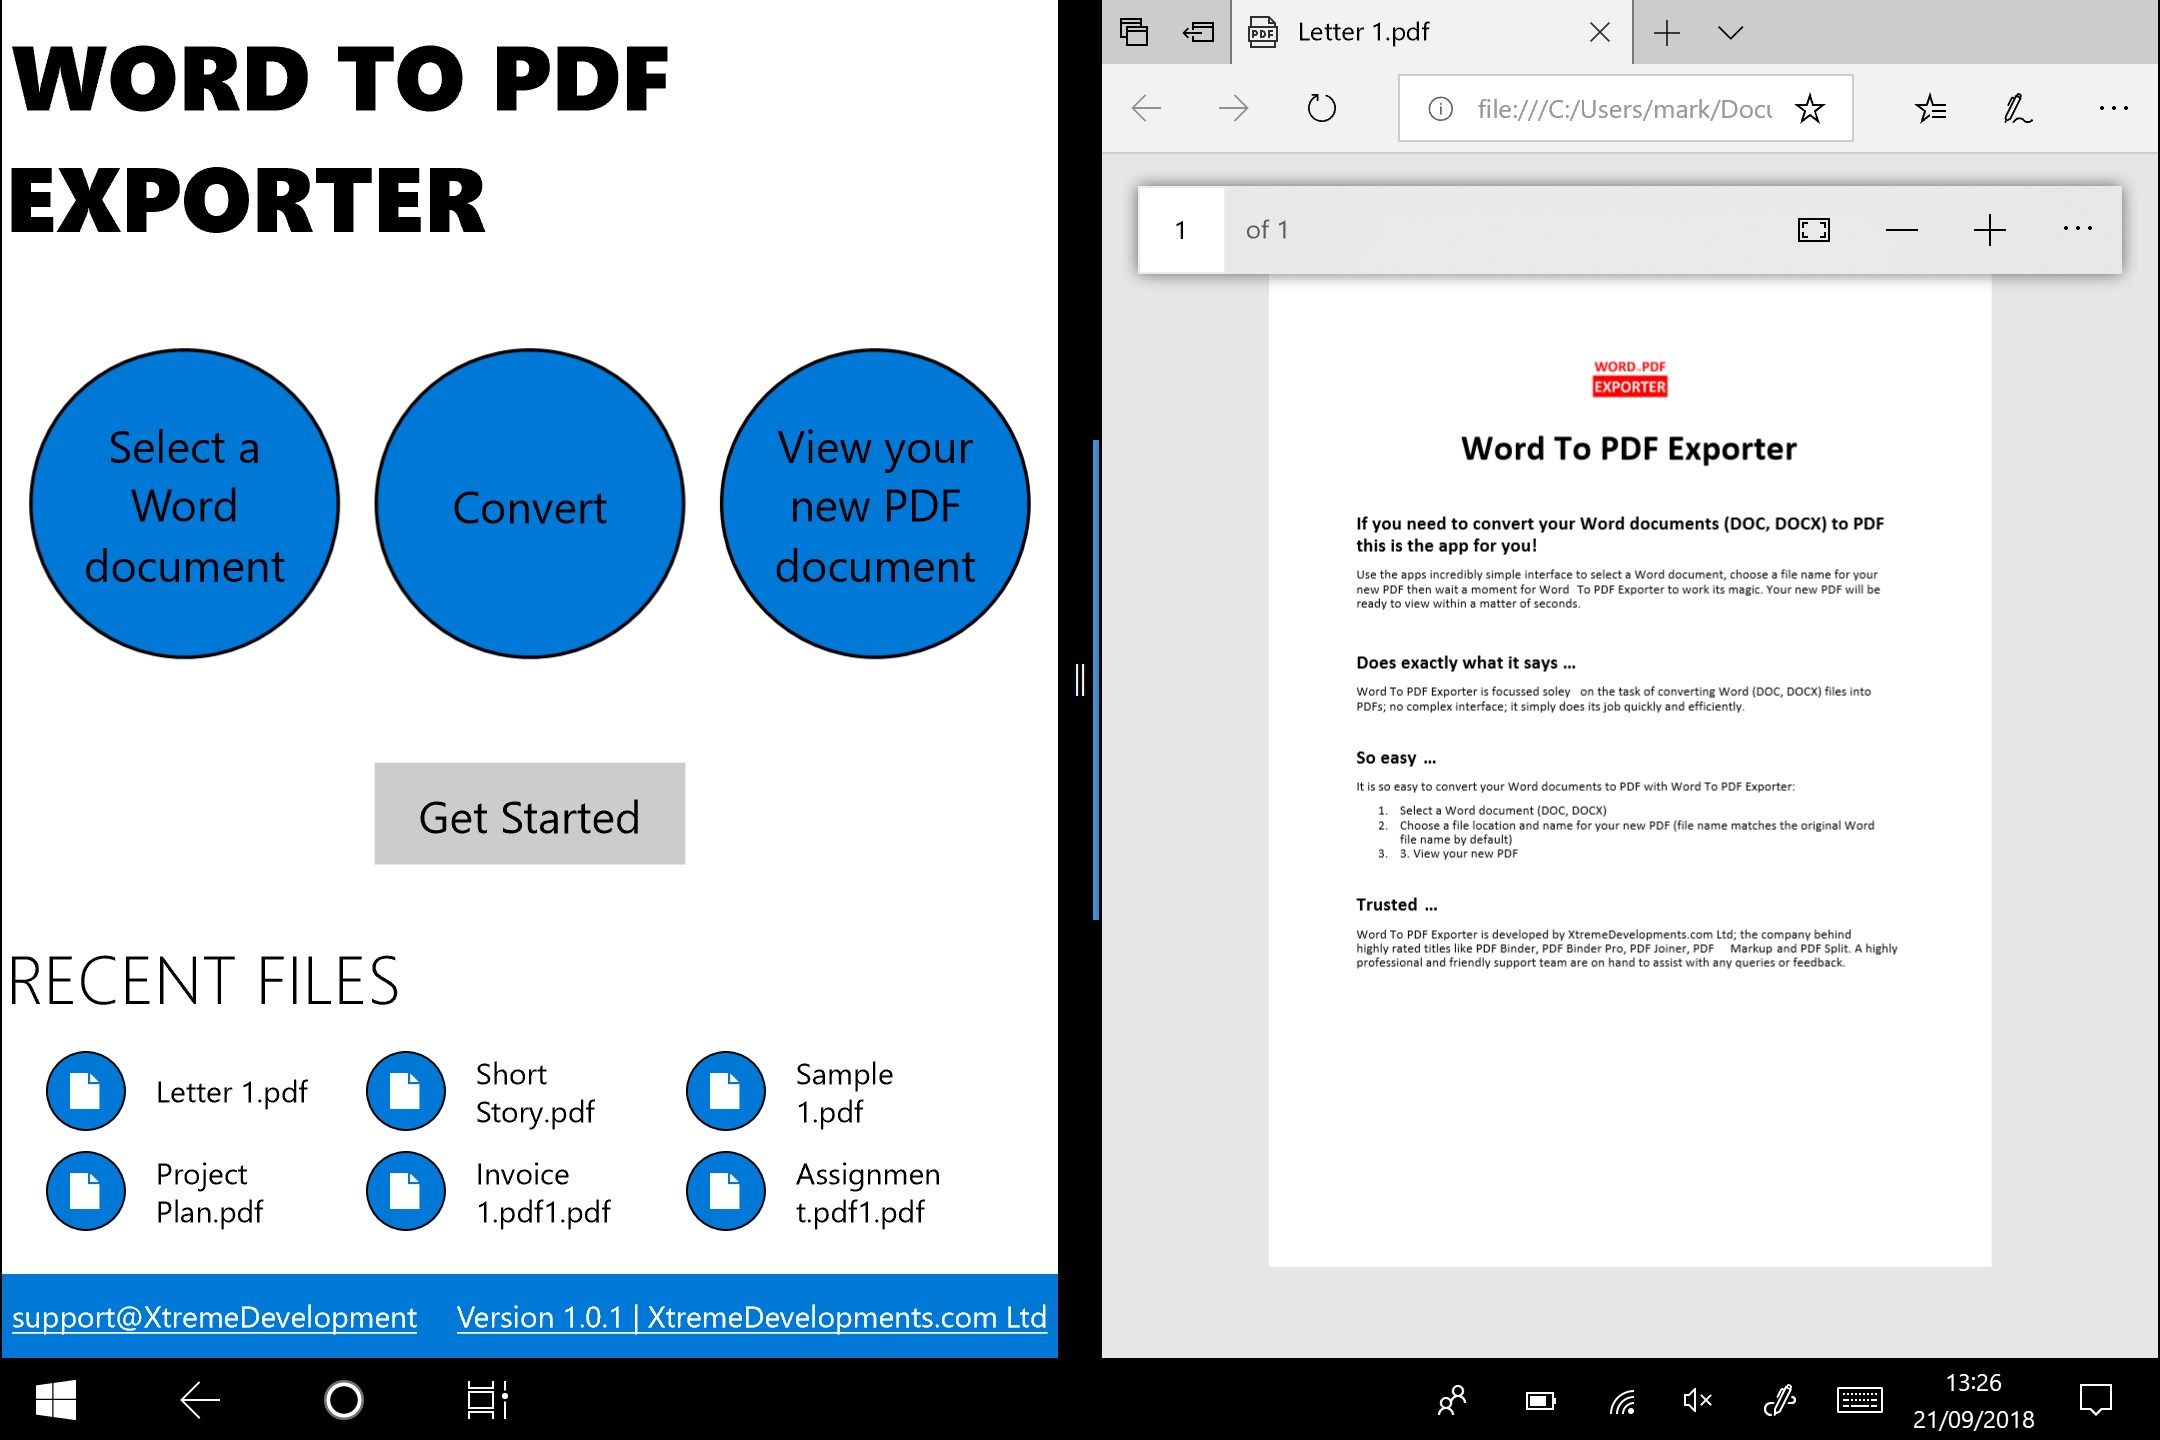 Word To PDF Exporter